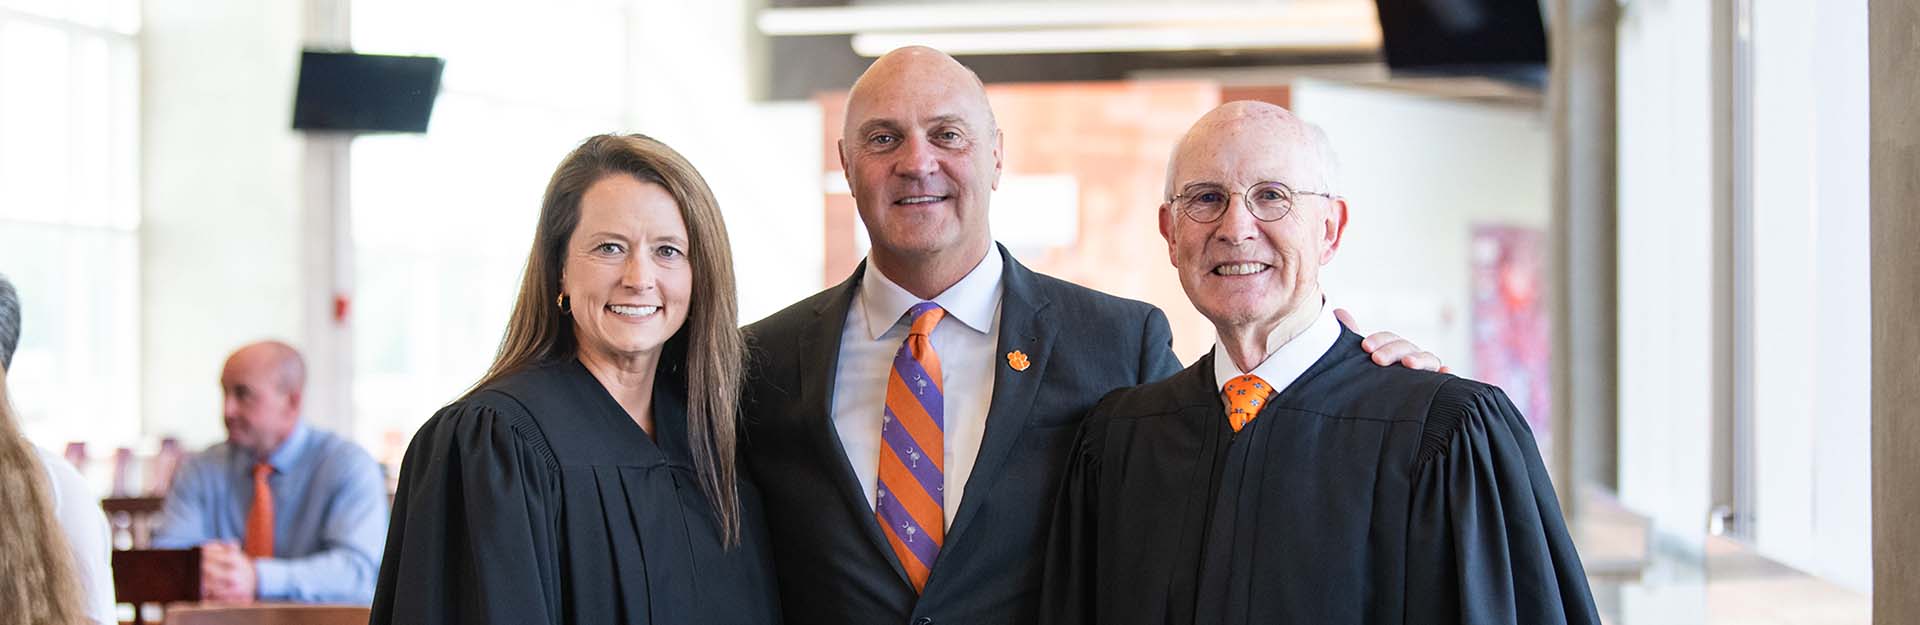 Judges Gary Clary and Lindsey Simmons stand next to President Clements for a photo after being sworn in.